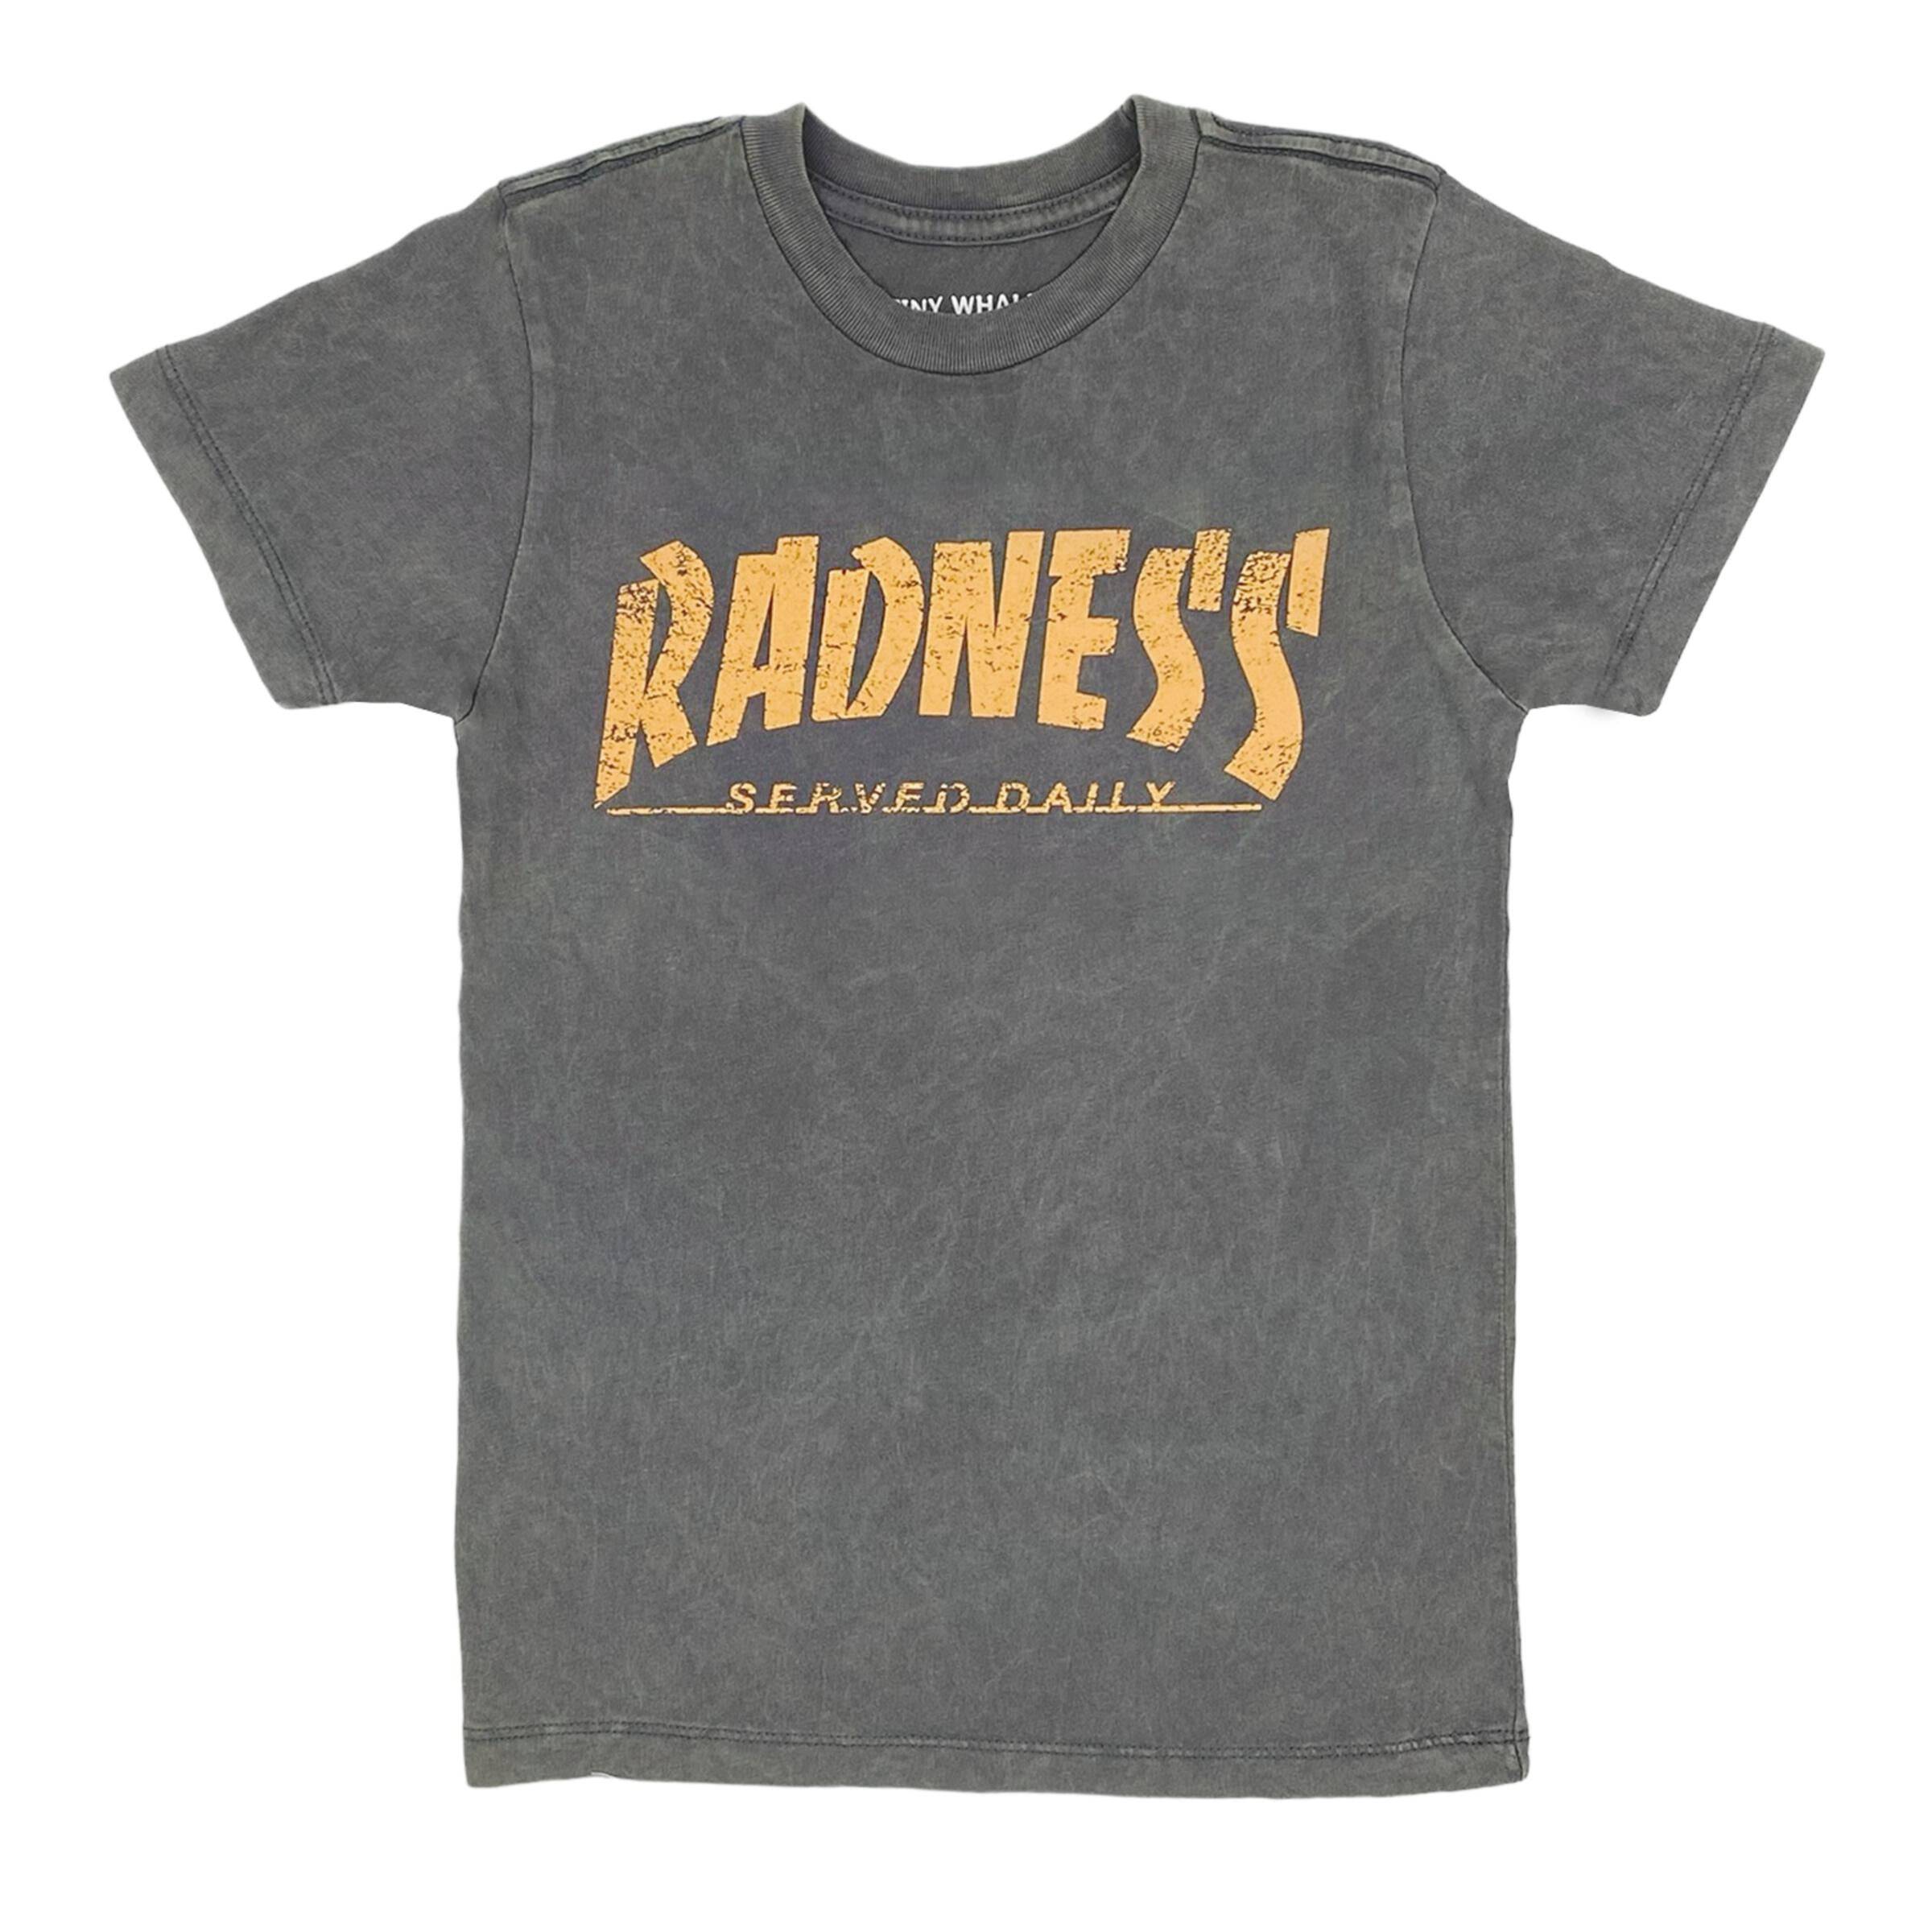 Tiny Whales Radness Mineral Black T-Shirt - Twinkle Twinkle Little One